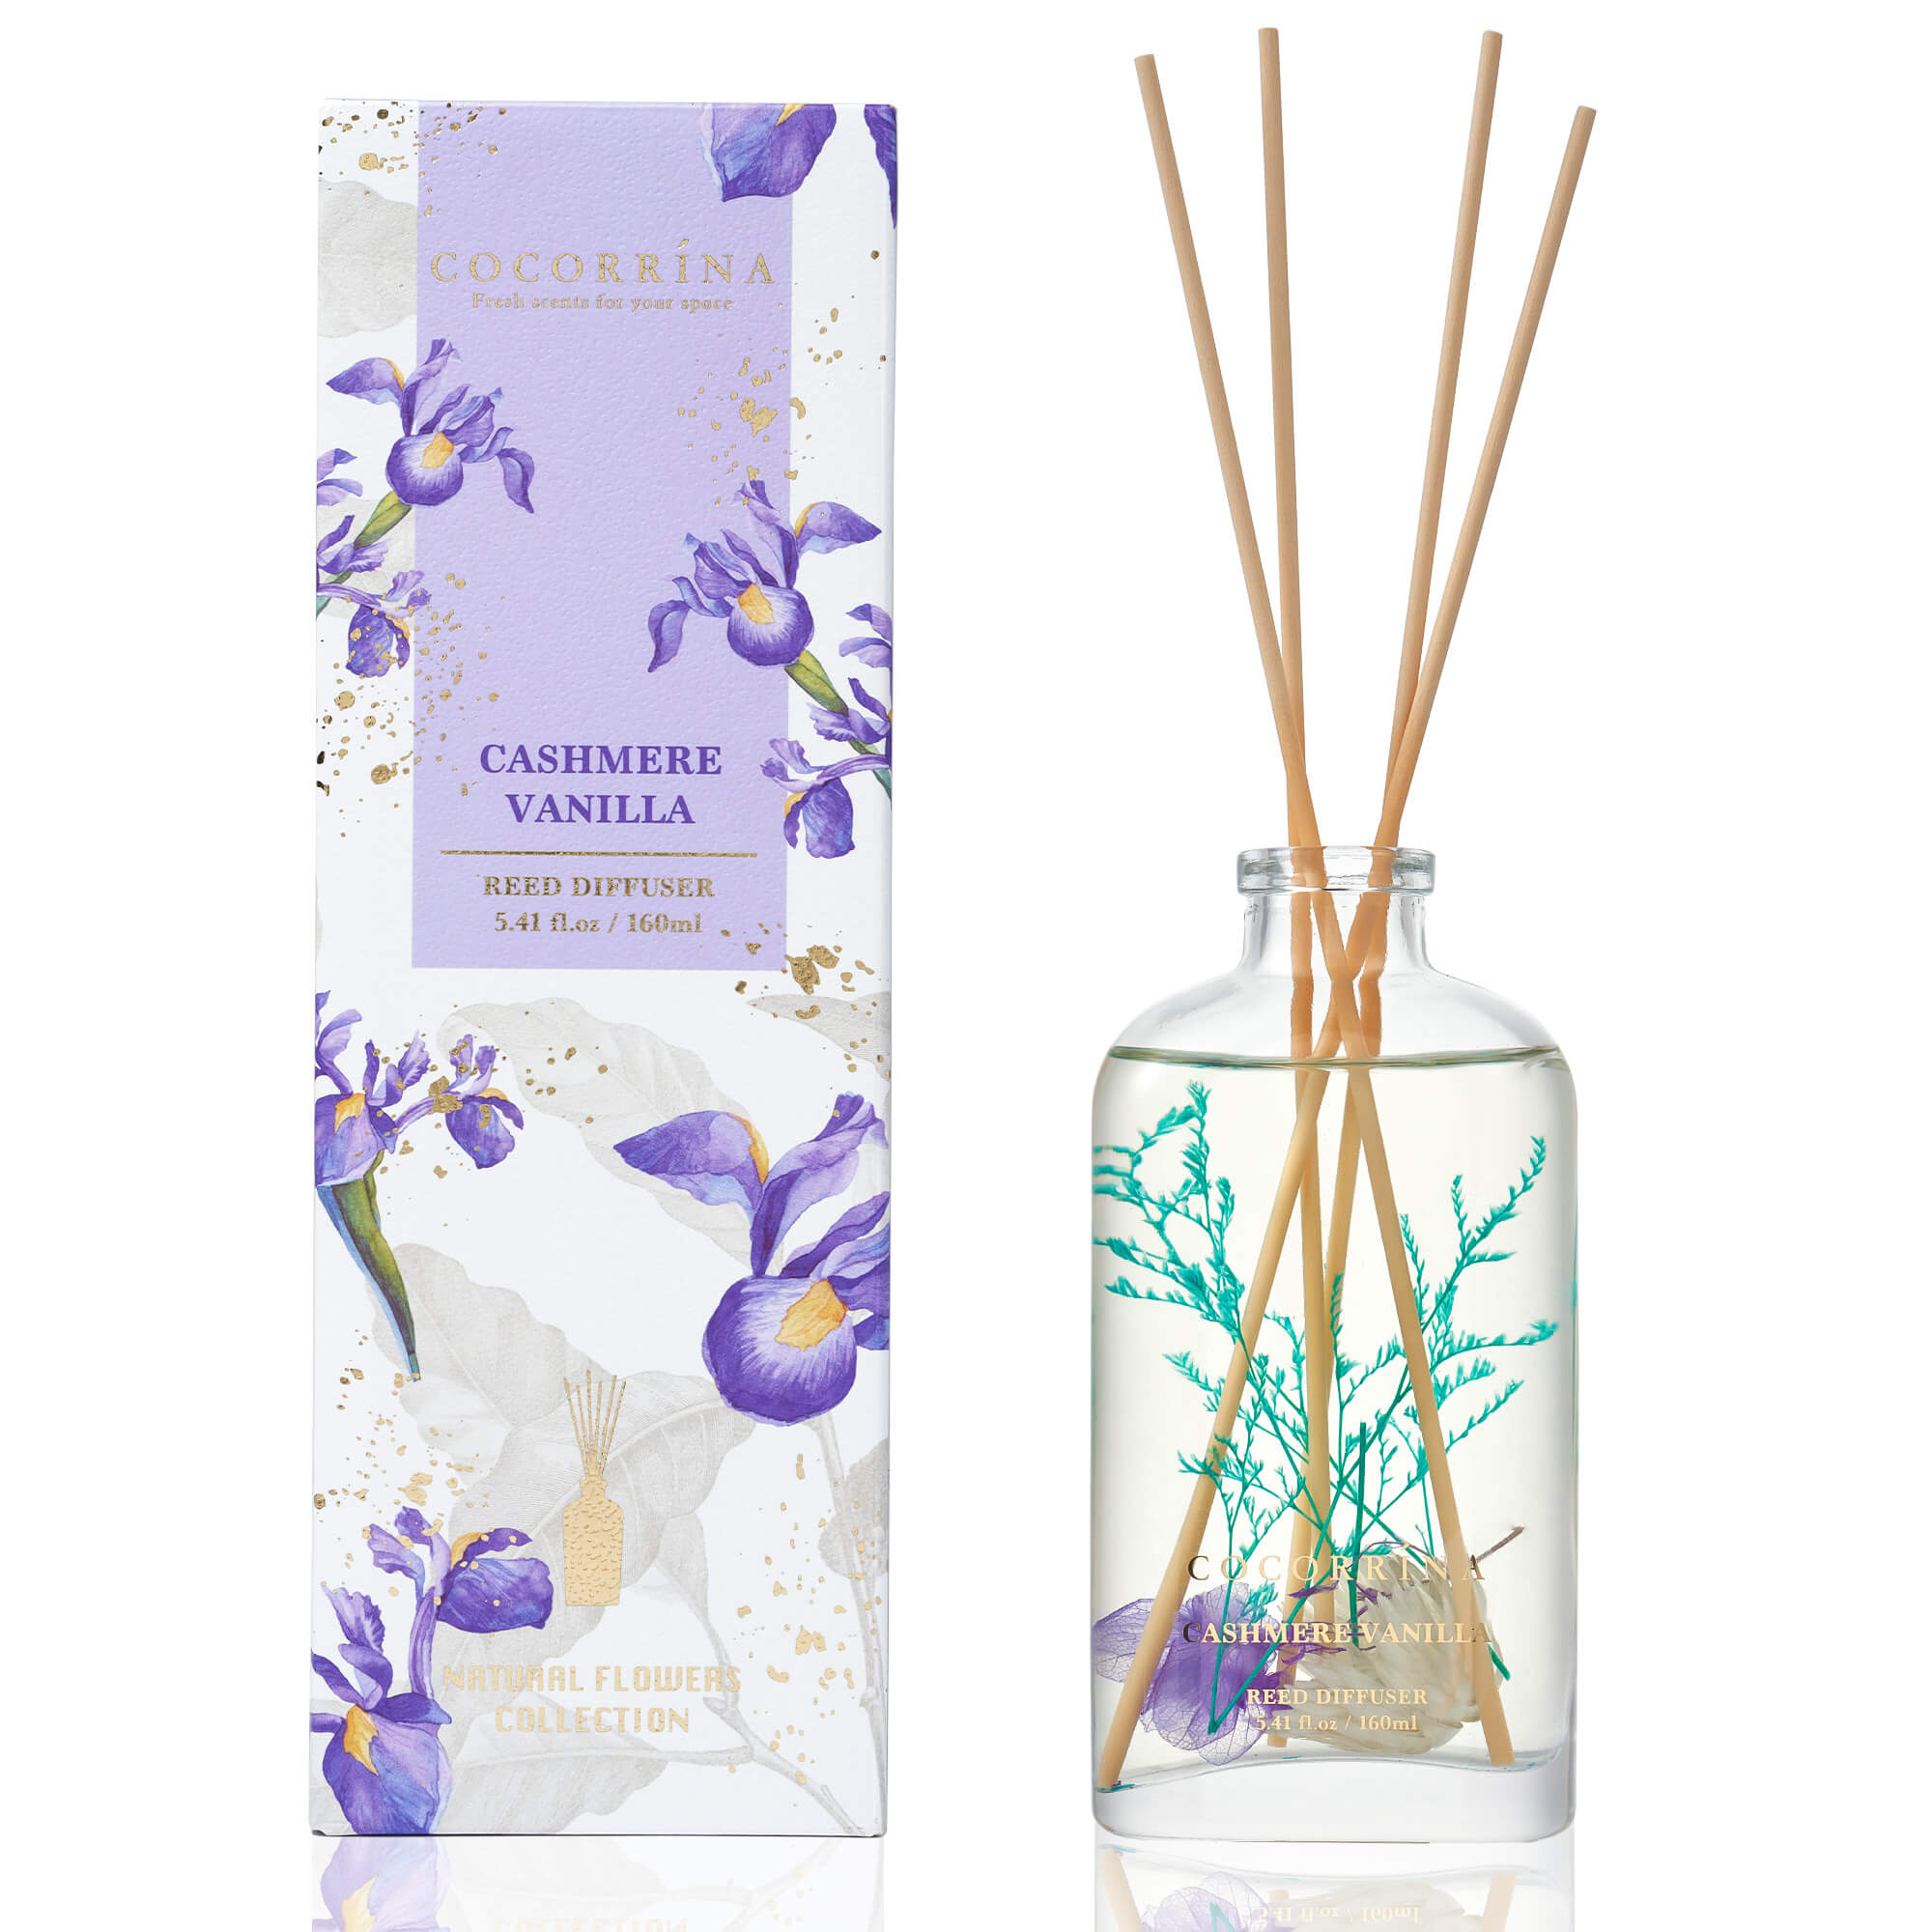 COCORRÍNA Cashmere Vanilla Scented Blooms Series Reed Diffuser Set